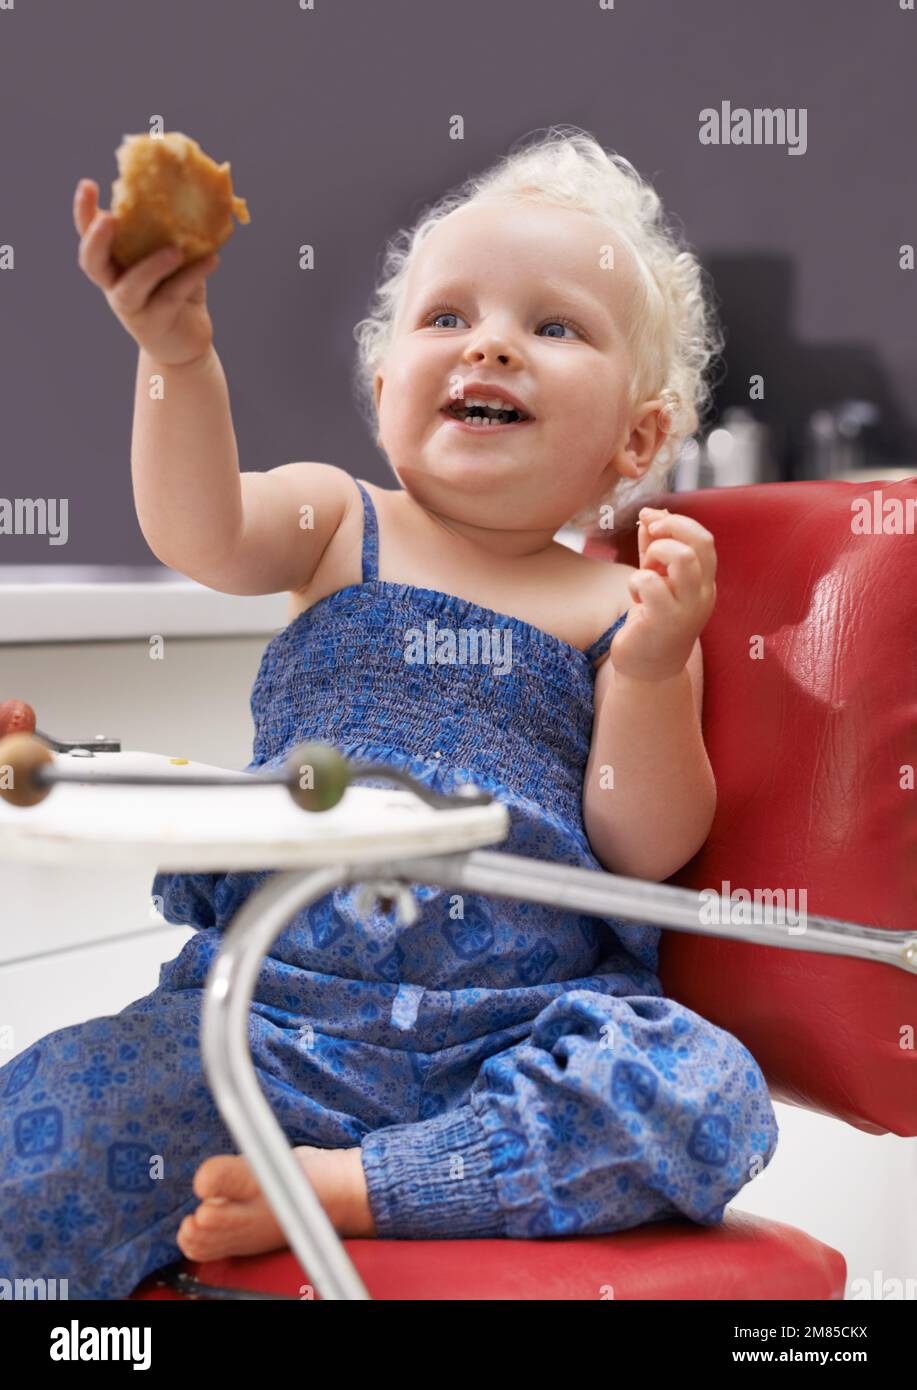 I can feed myself. a cute young baby sitting in a high chair eating. Stock Photo